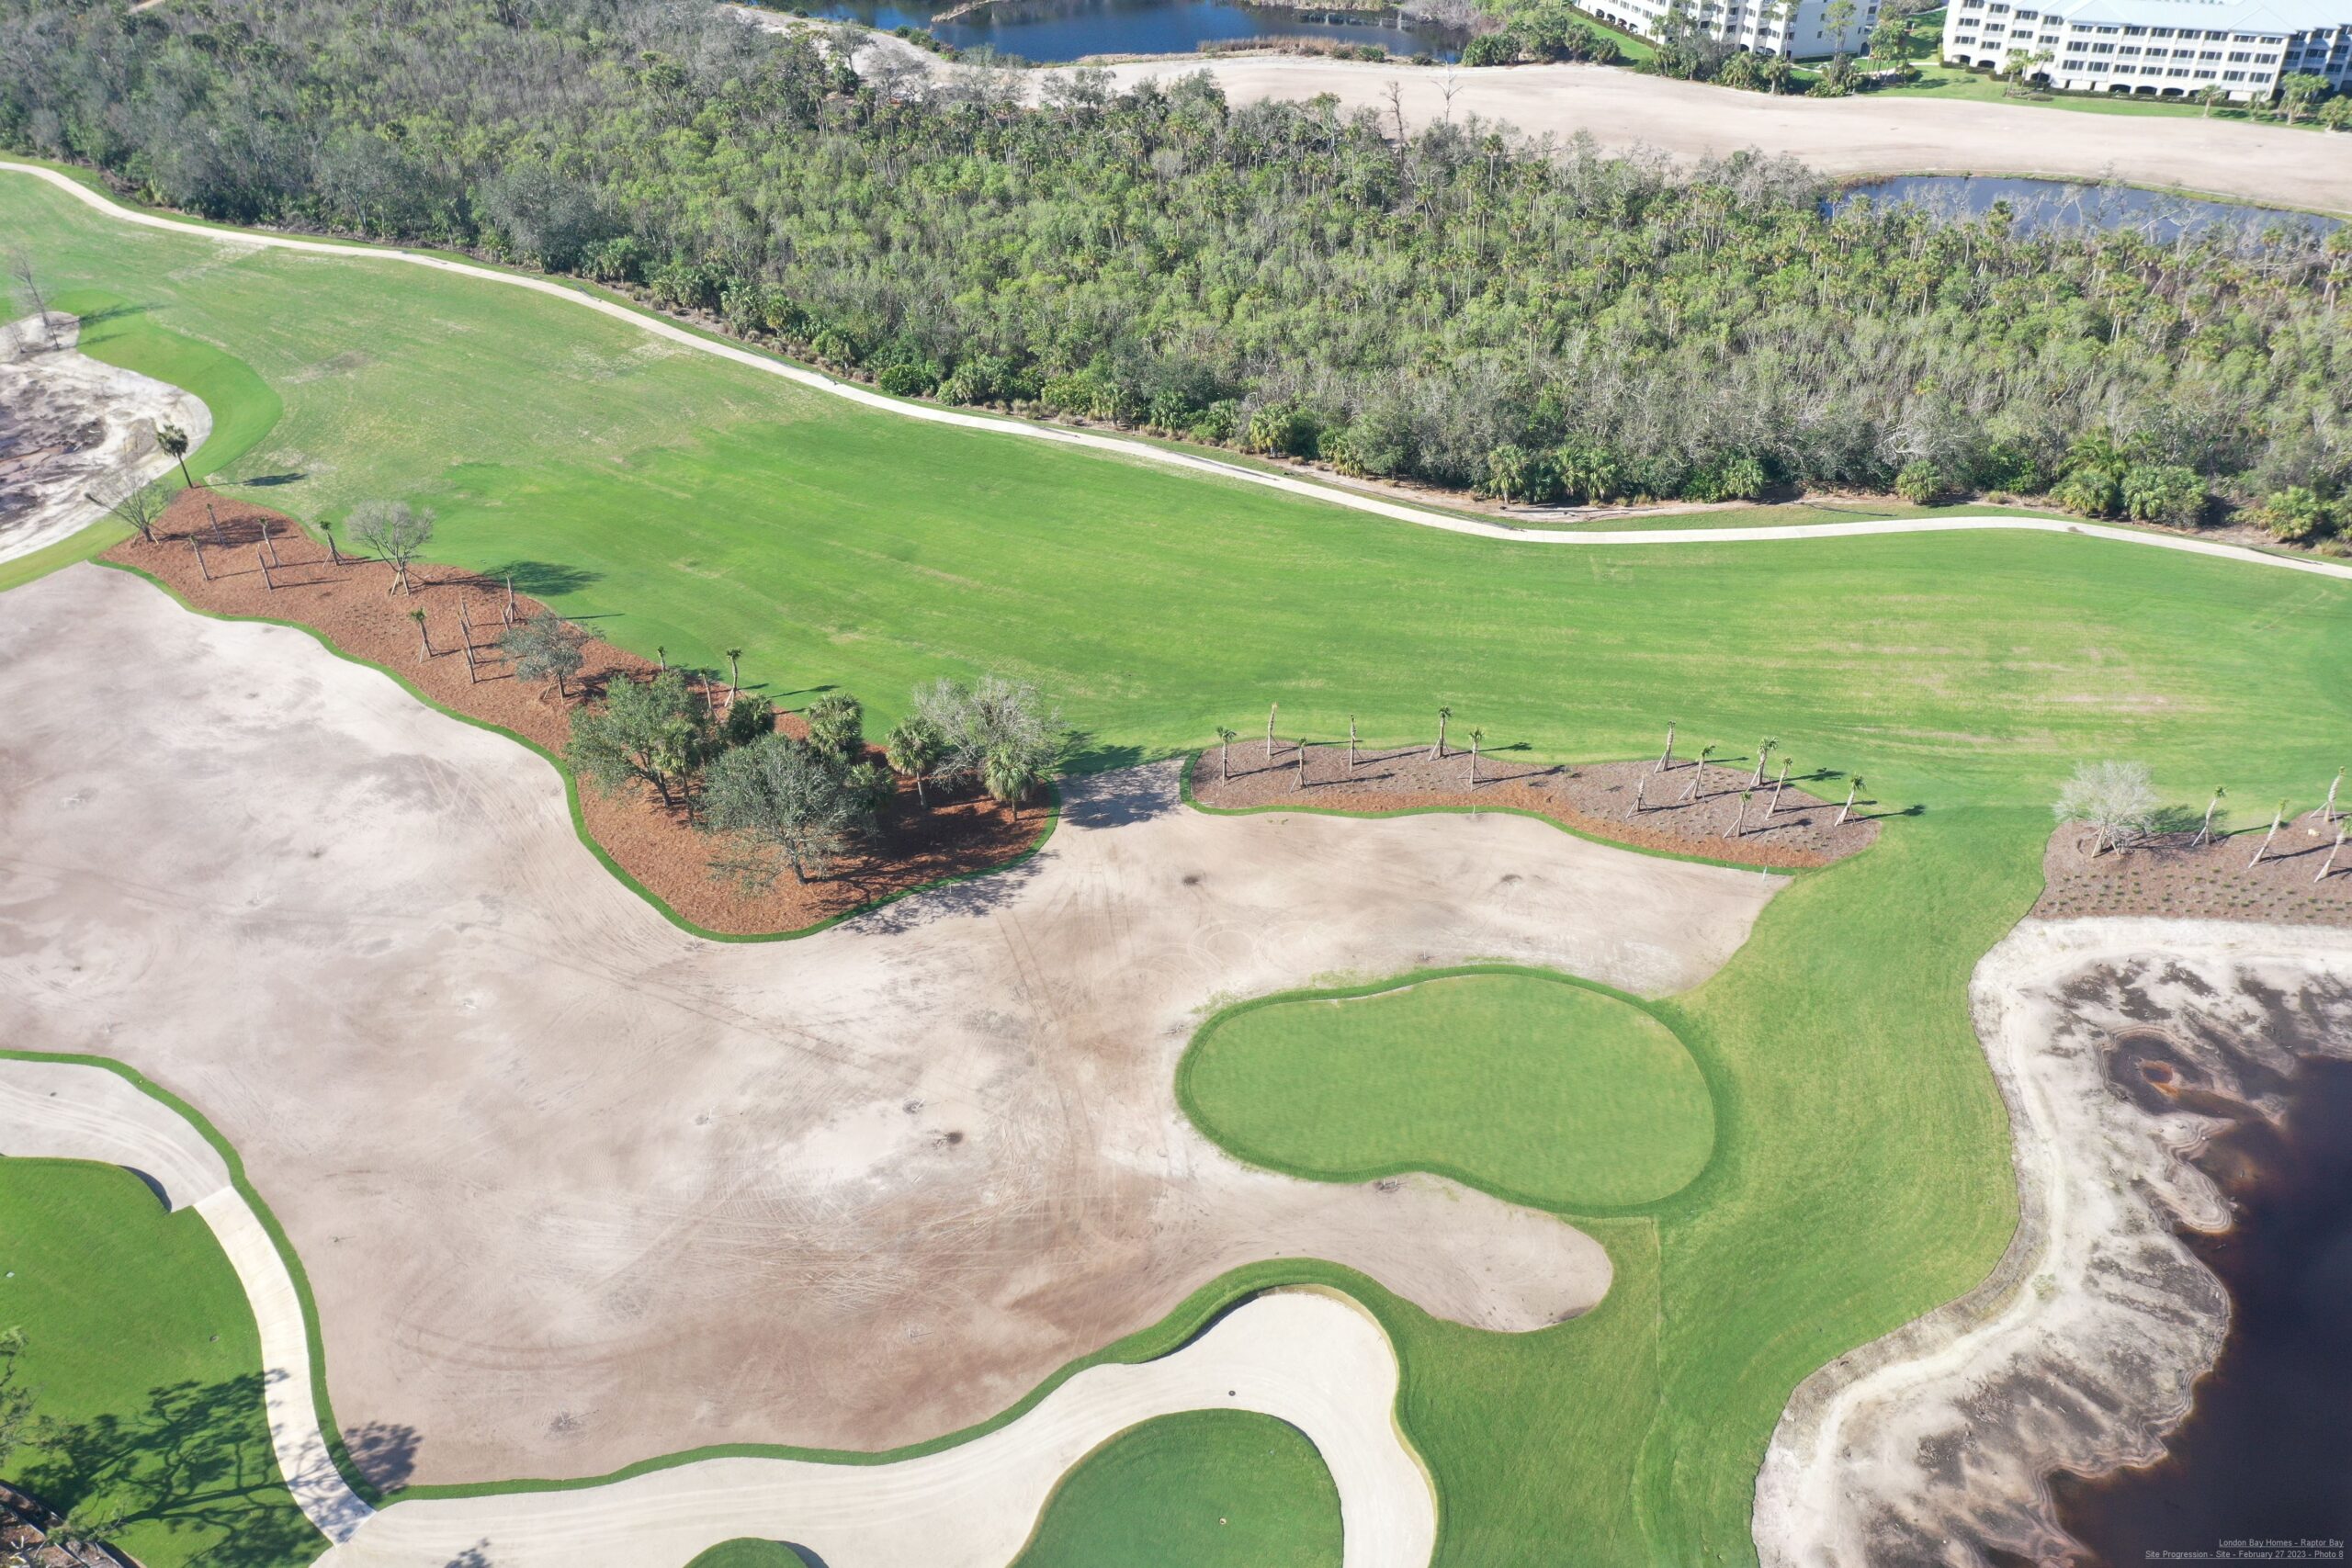 An aerial view of the Saltleaf Golf Preserve, a championship golf course located in Bonita Springs, Florida.